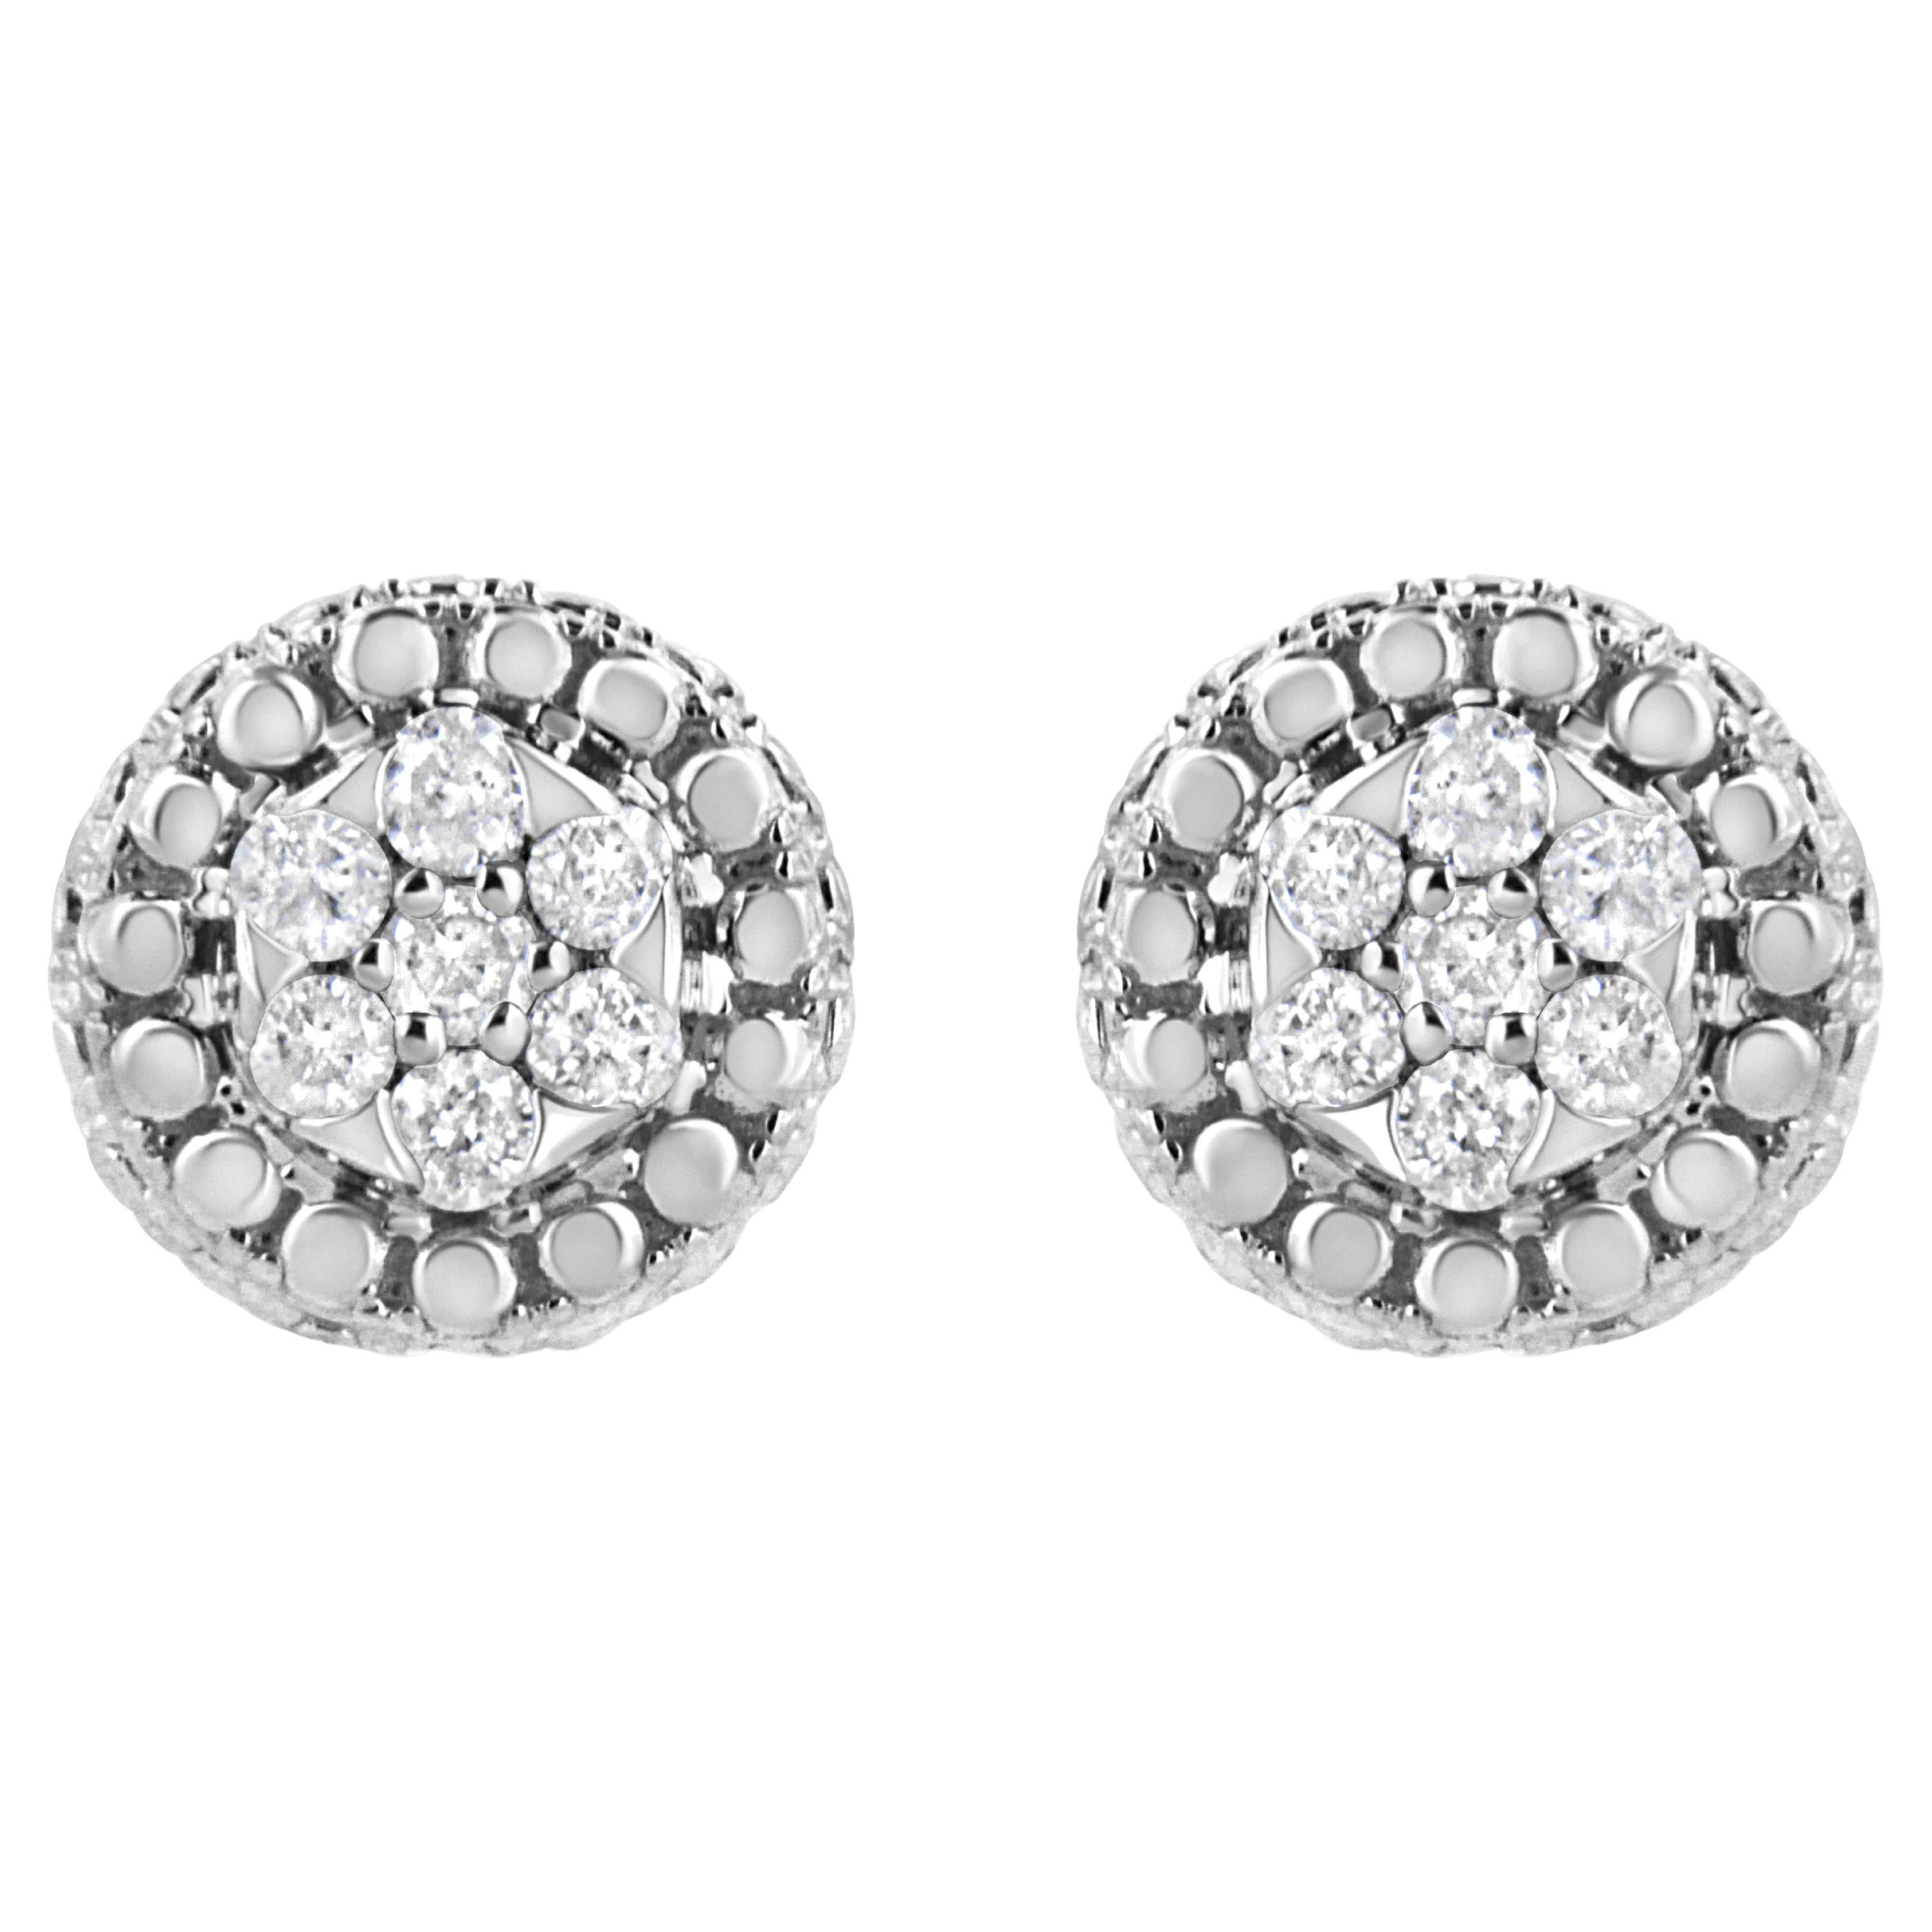 .925 Sterling Silver 1/3 Carat 7 Stone Pave Set Diamond Beaded Stud Earrings For Sale